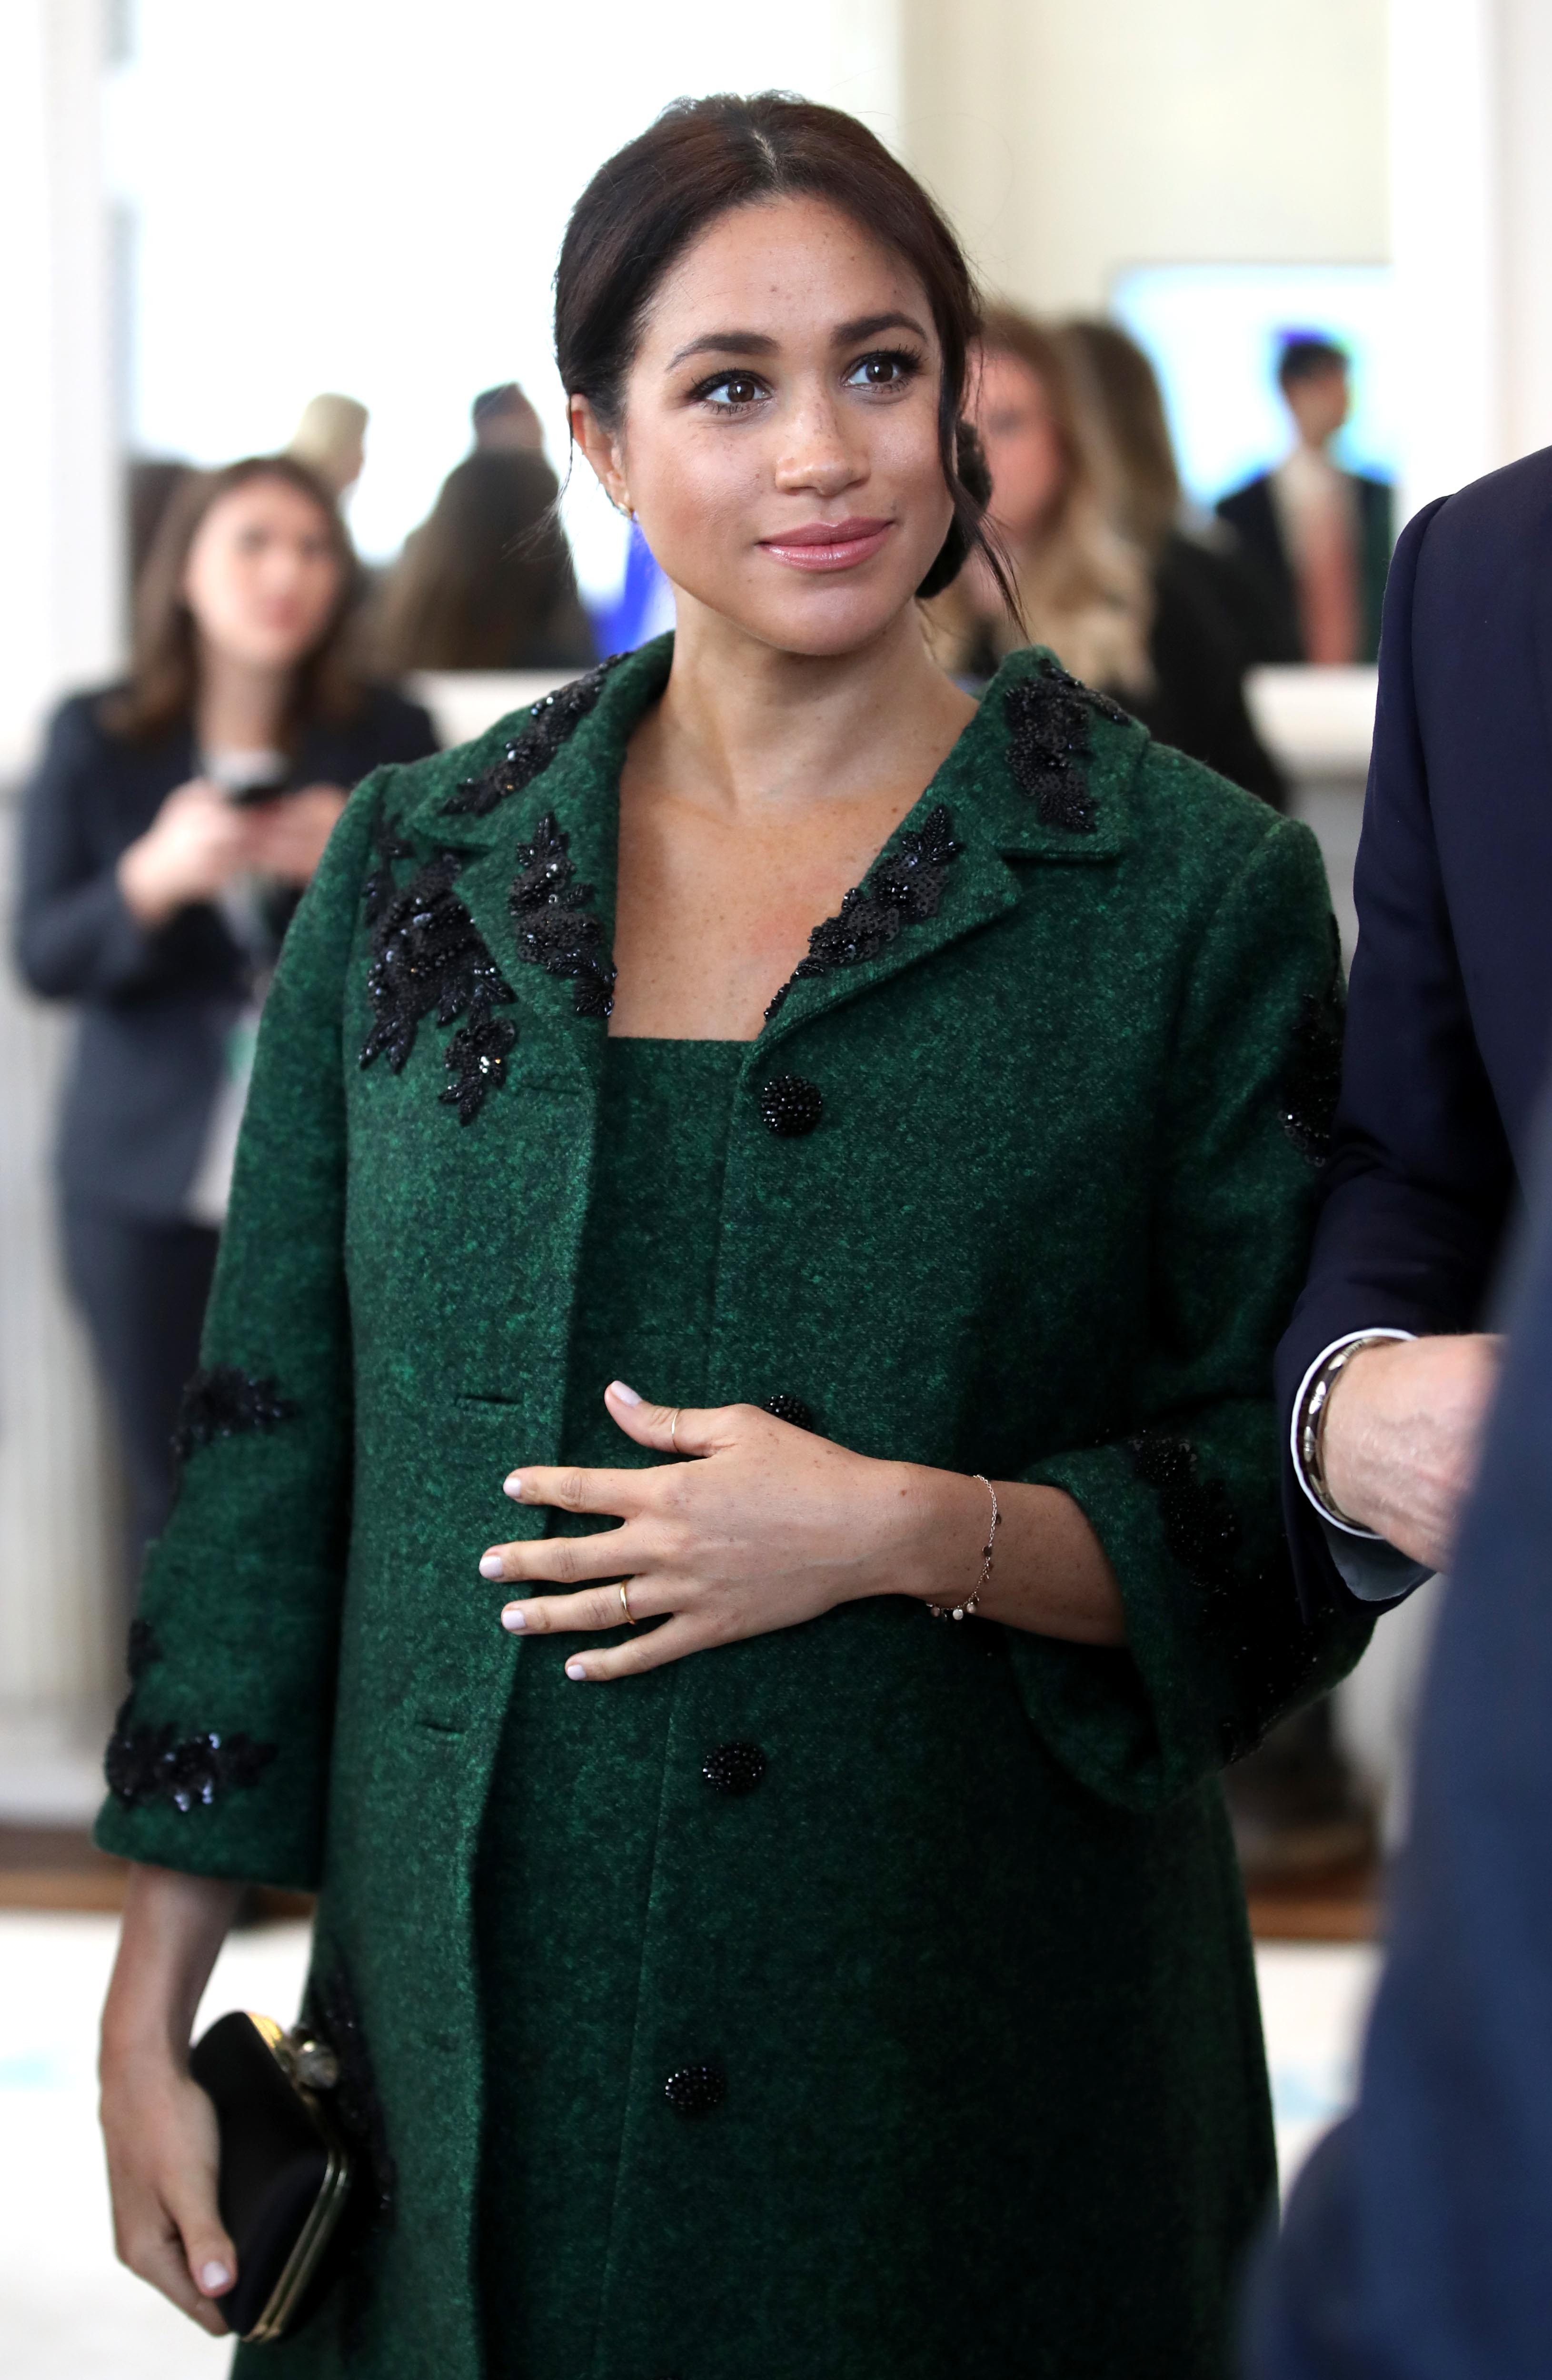 Meghan Markle cradling her baby bump on Commonwealth Day in March 2019 | Photo: Getty Images